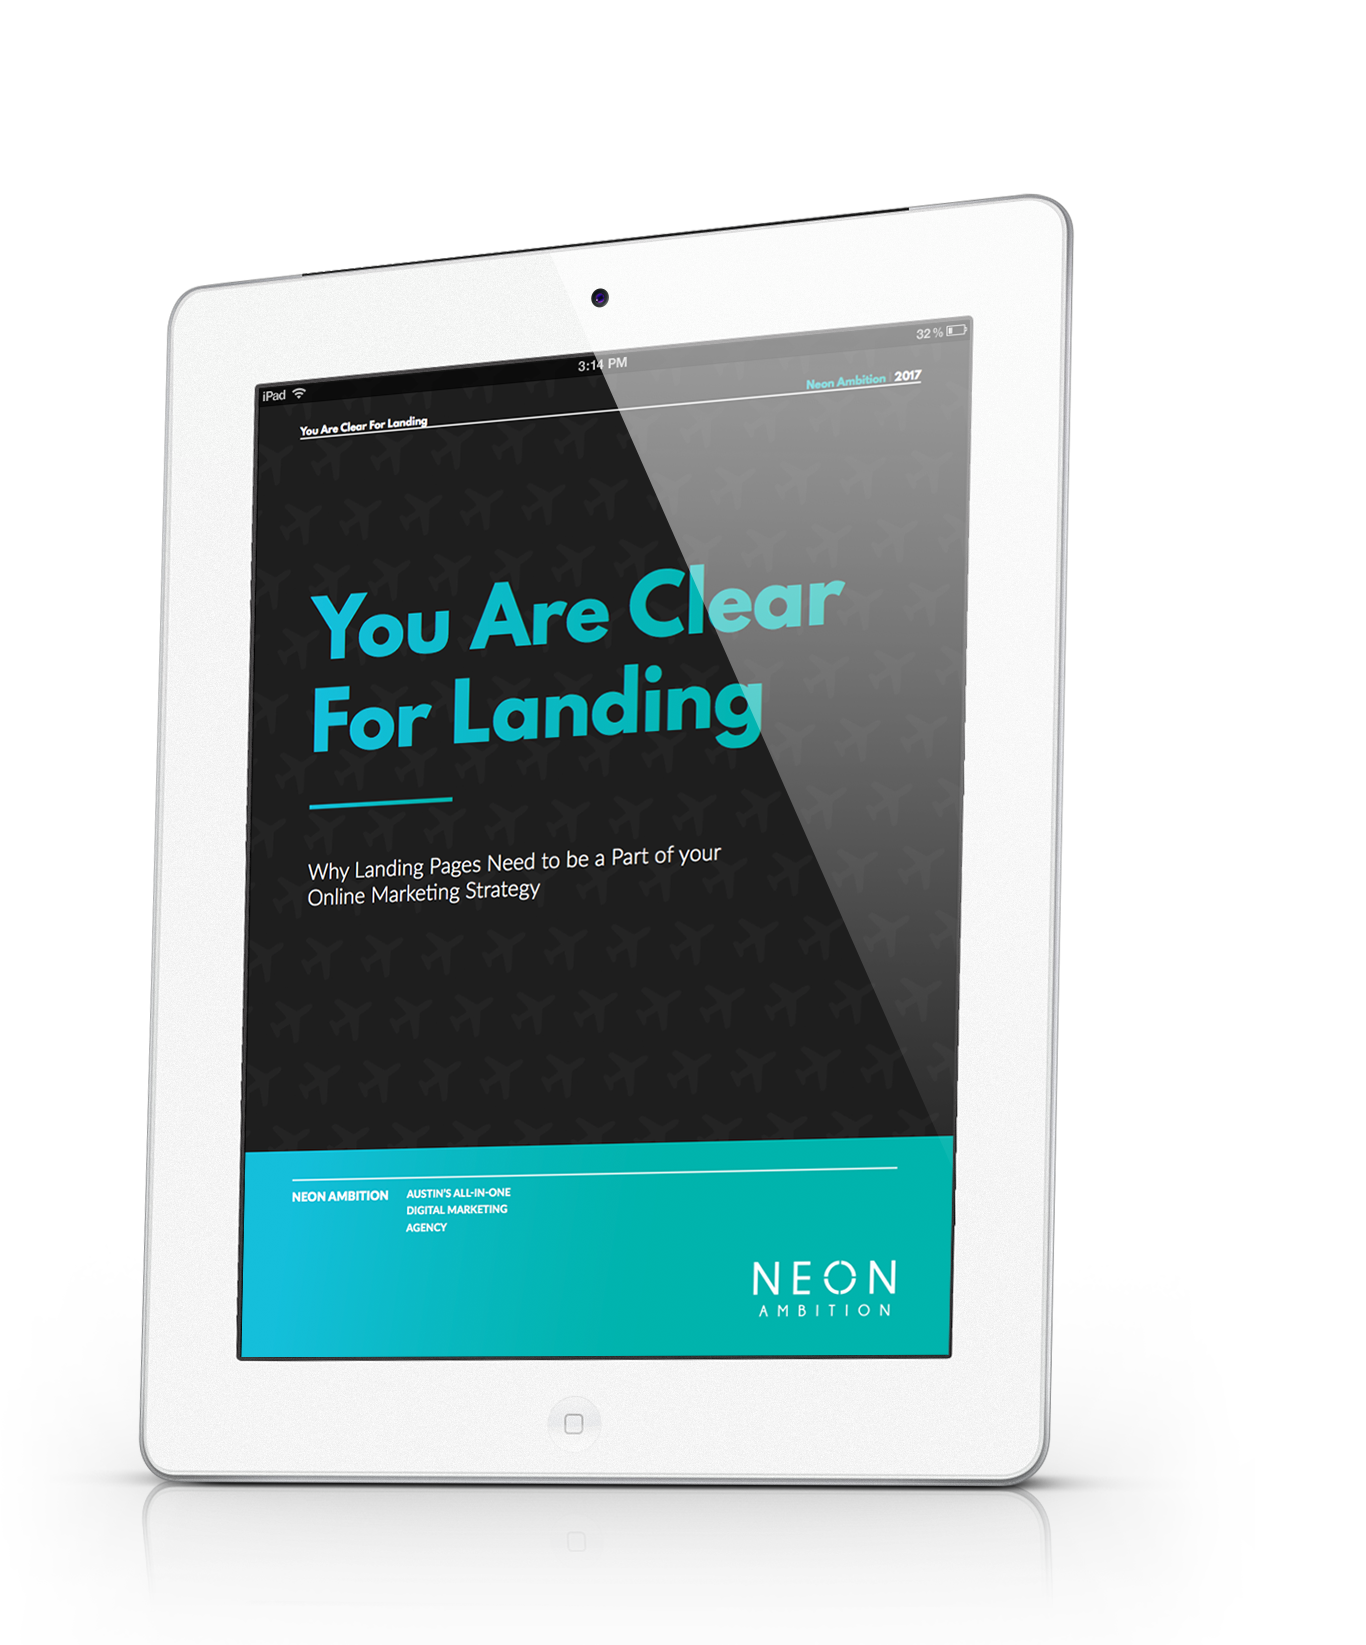 You are Clear For Landing- Landing page ebook from Neon Ambition: https://www.neonambition.com/you-are-clear-for-landing